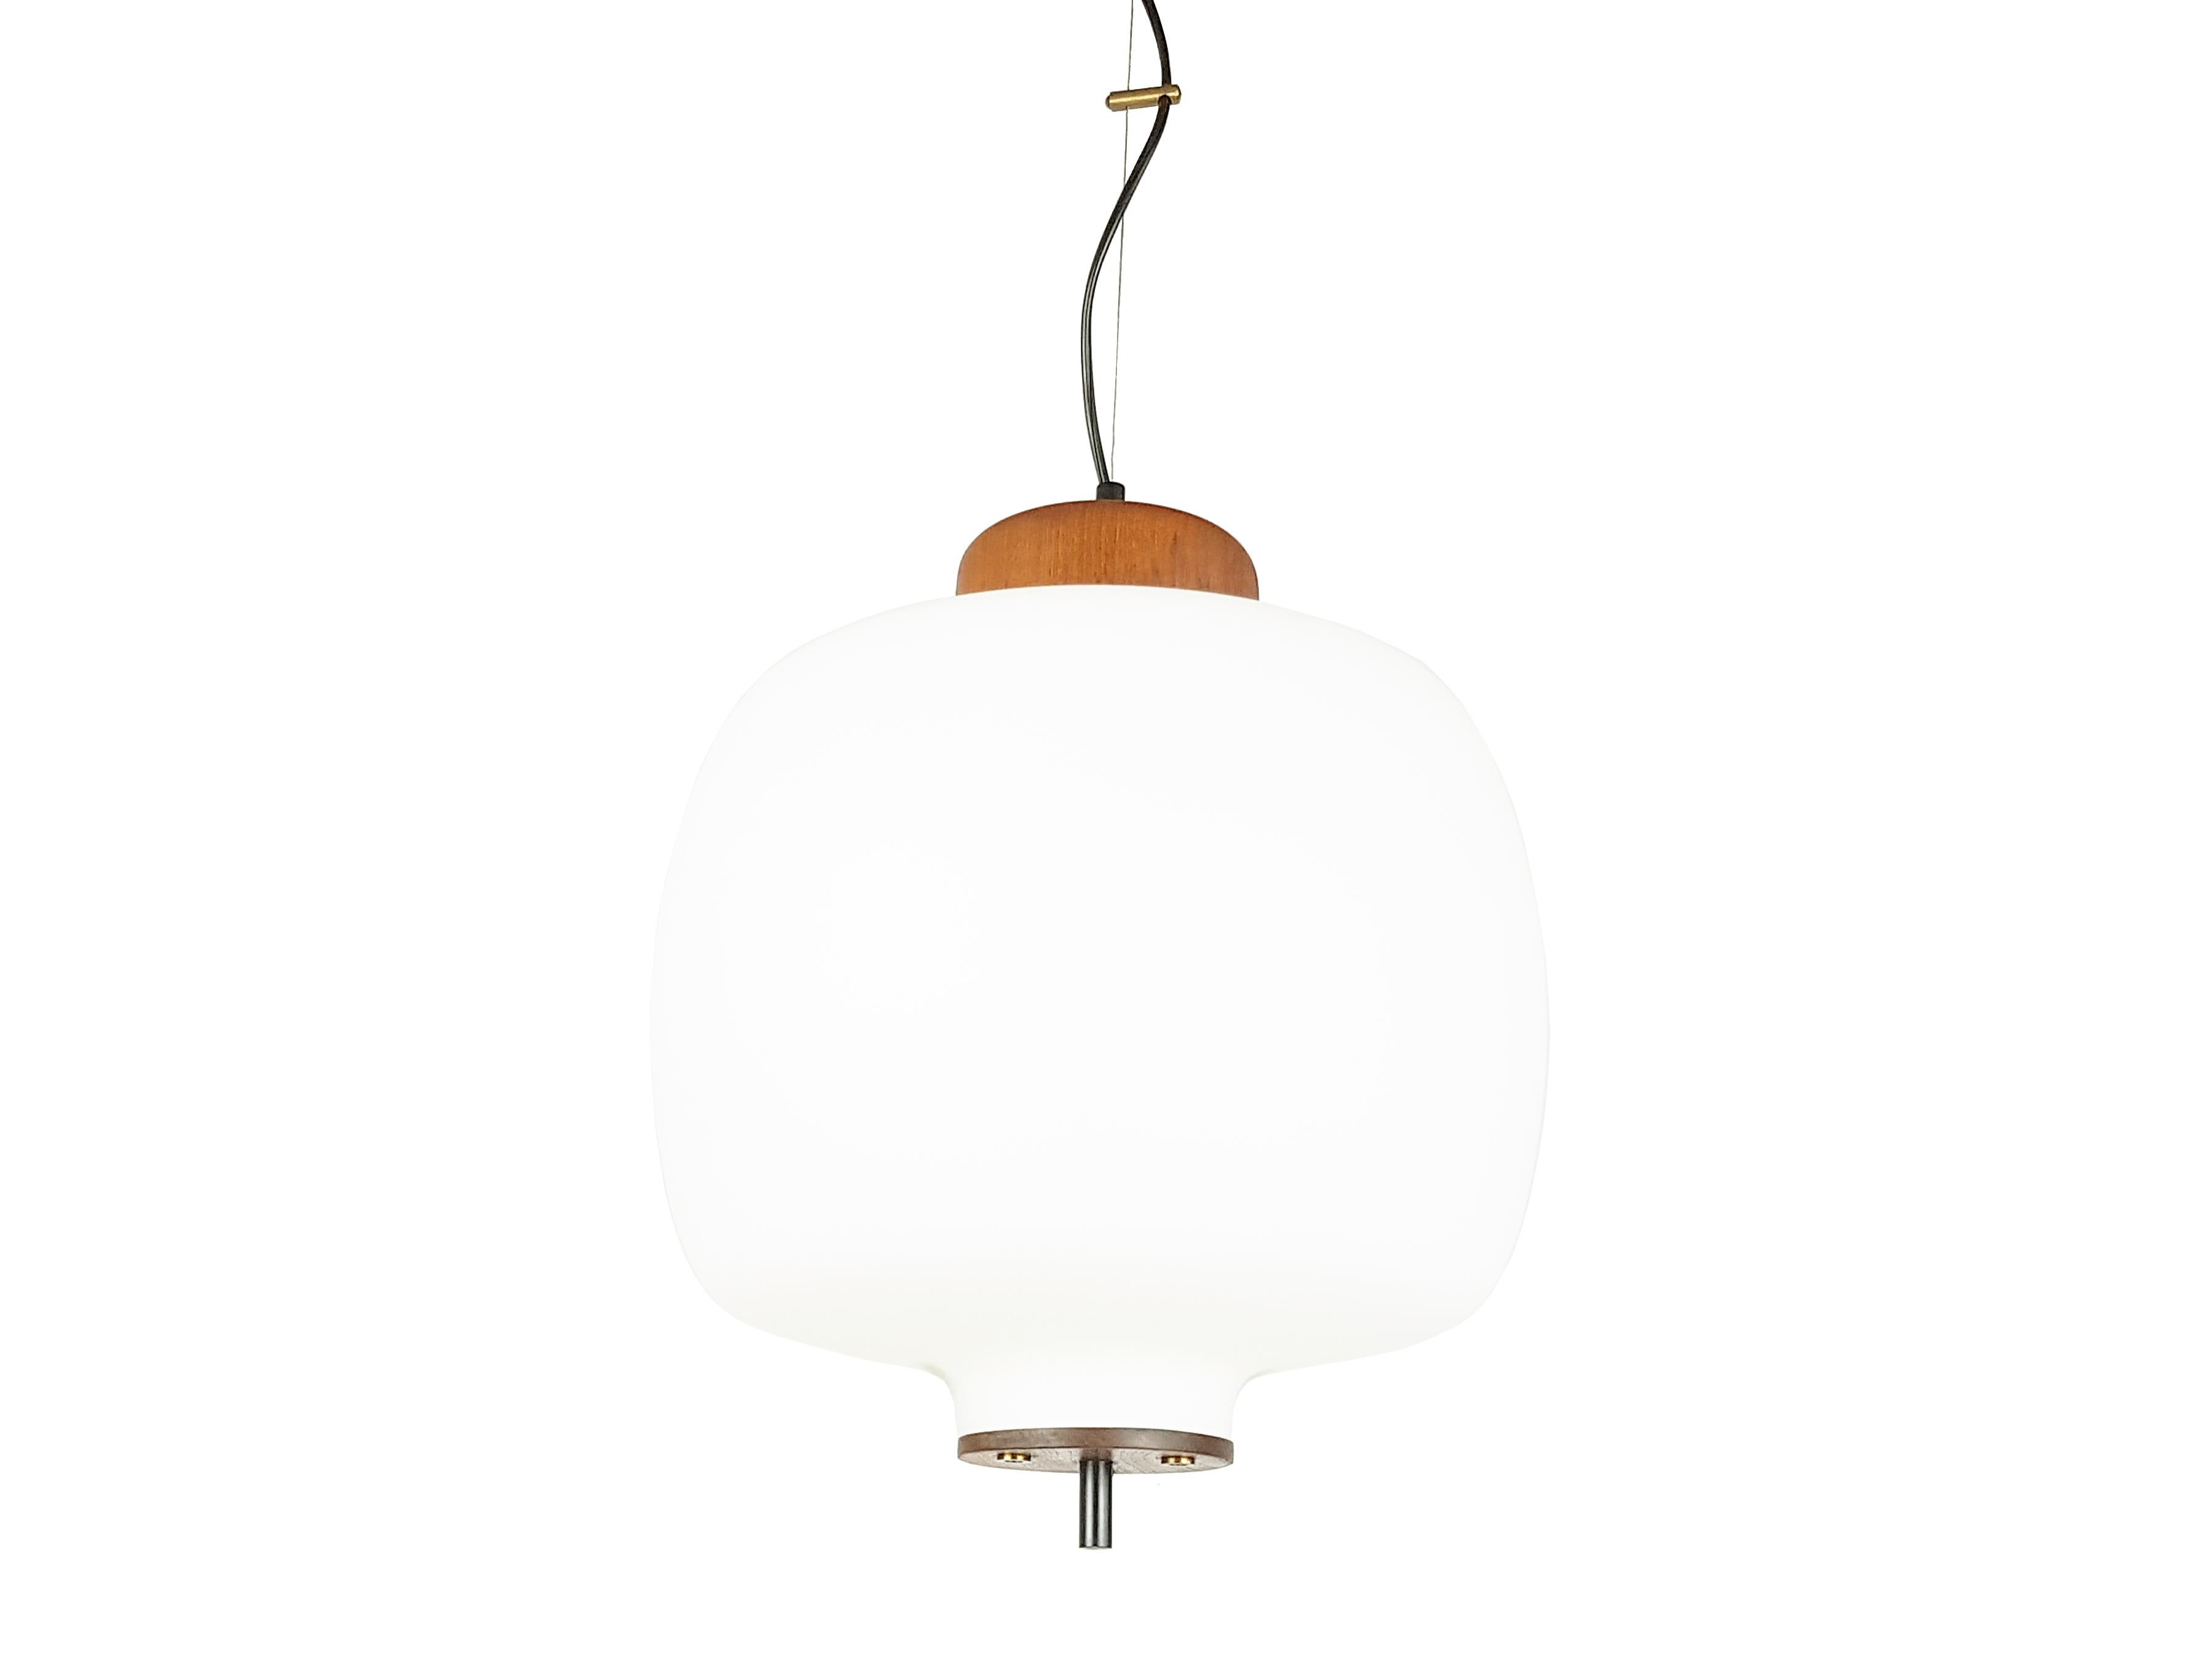 Beautiful pendant lamp in teakwood, brass and sandblasted opaline glass shade. Very good condition.

Body lamp measures cm 45 H x 35 D.